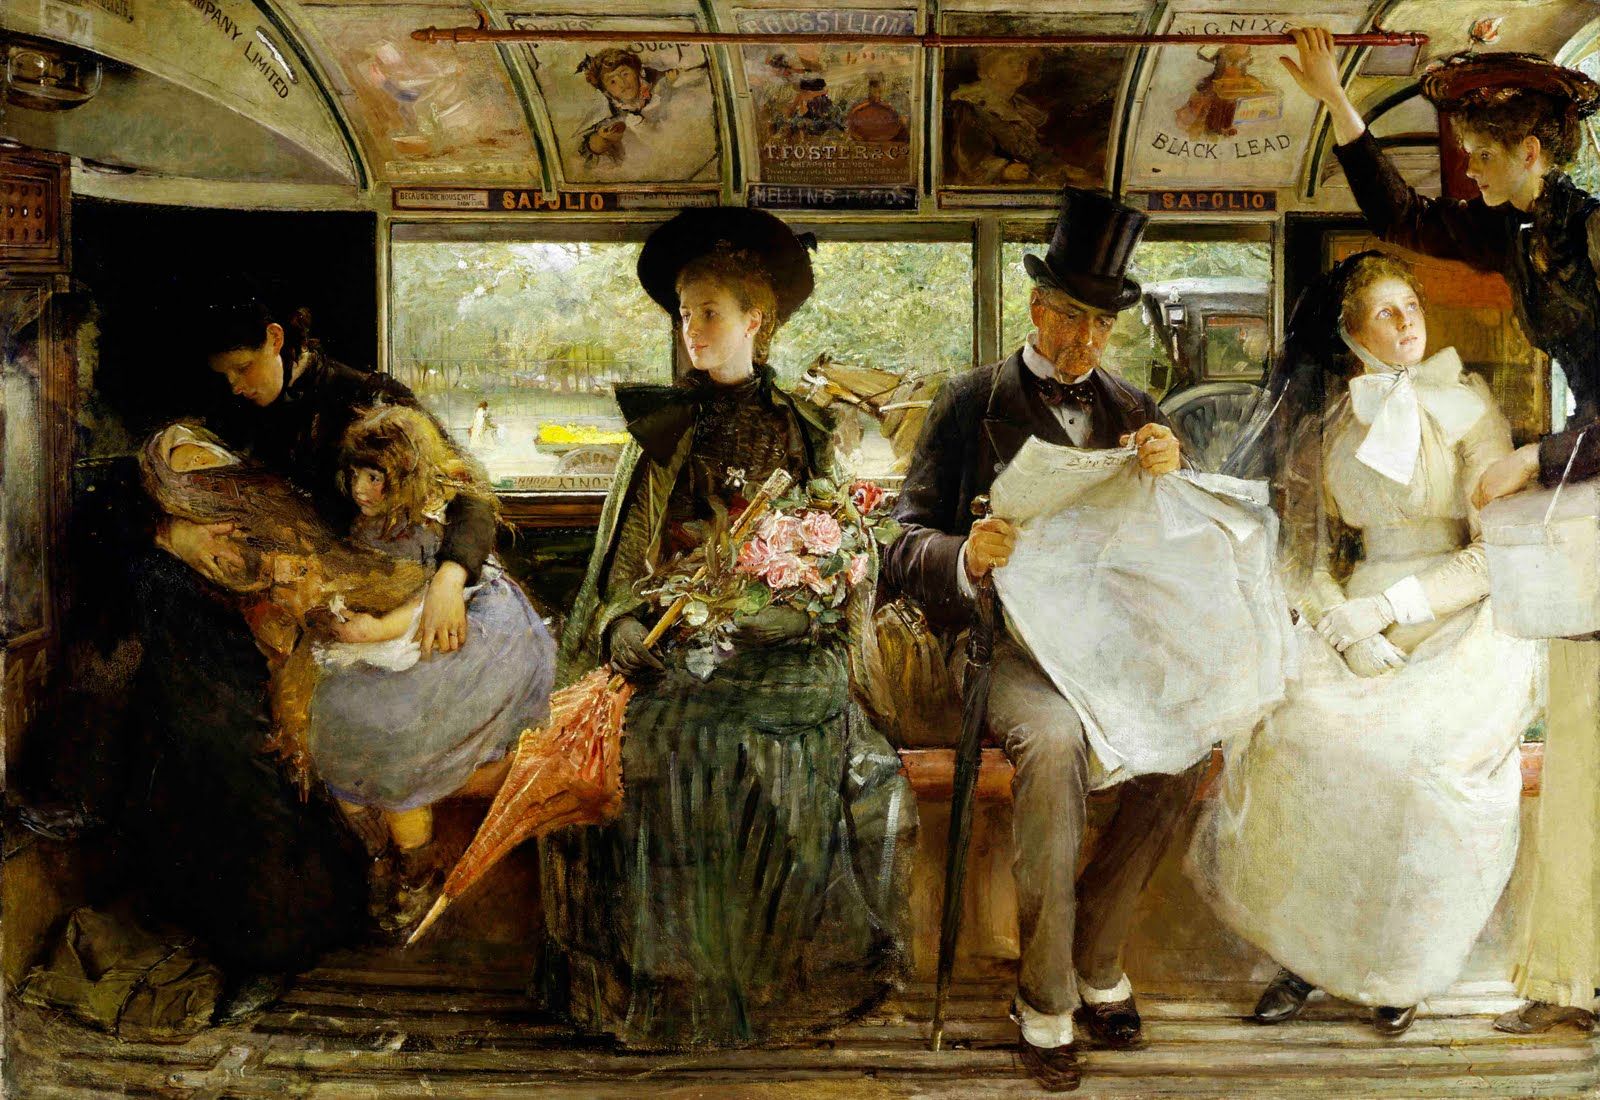 The omnibus, a horse-drawn bus, was one of the new modes of travel during the Victorian era. "The Bayswater Omnibus" by George William Joy, 1895. The Museum of London.  